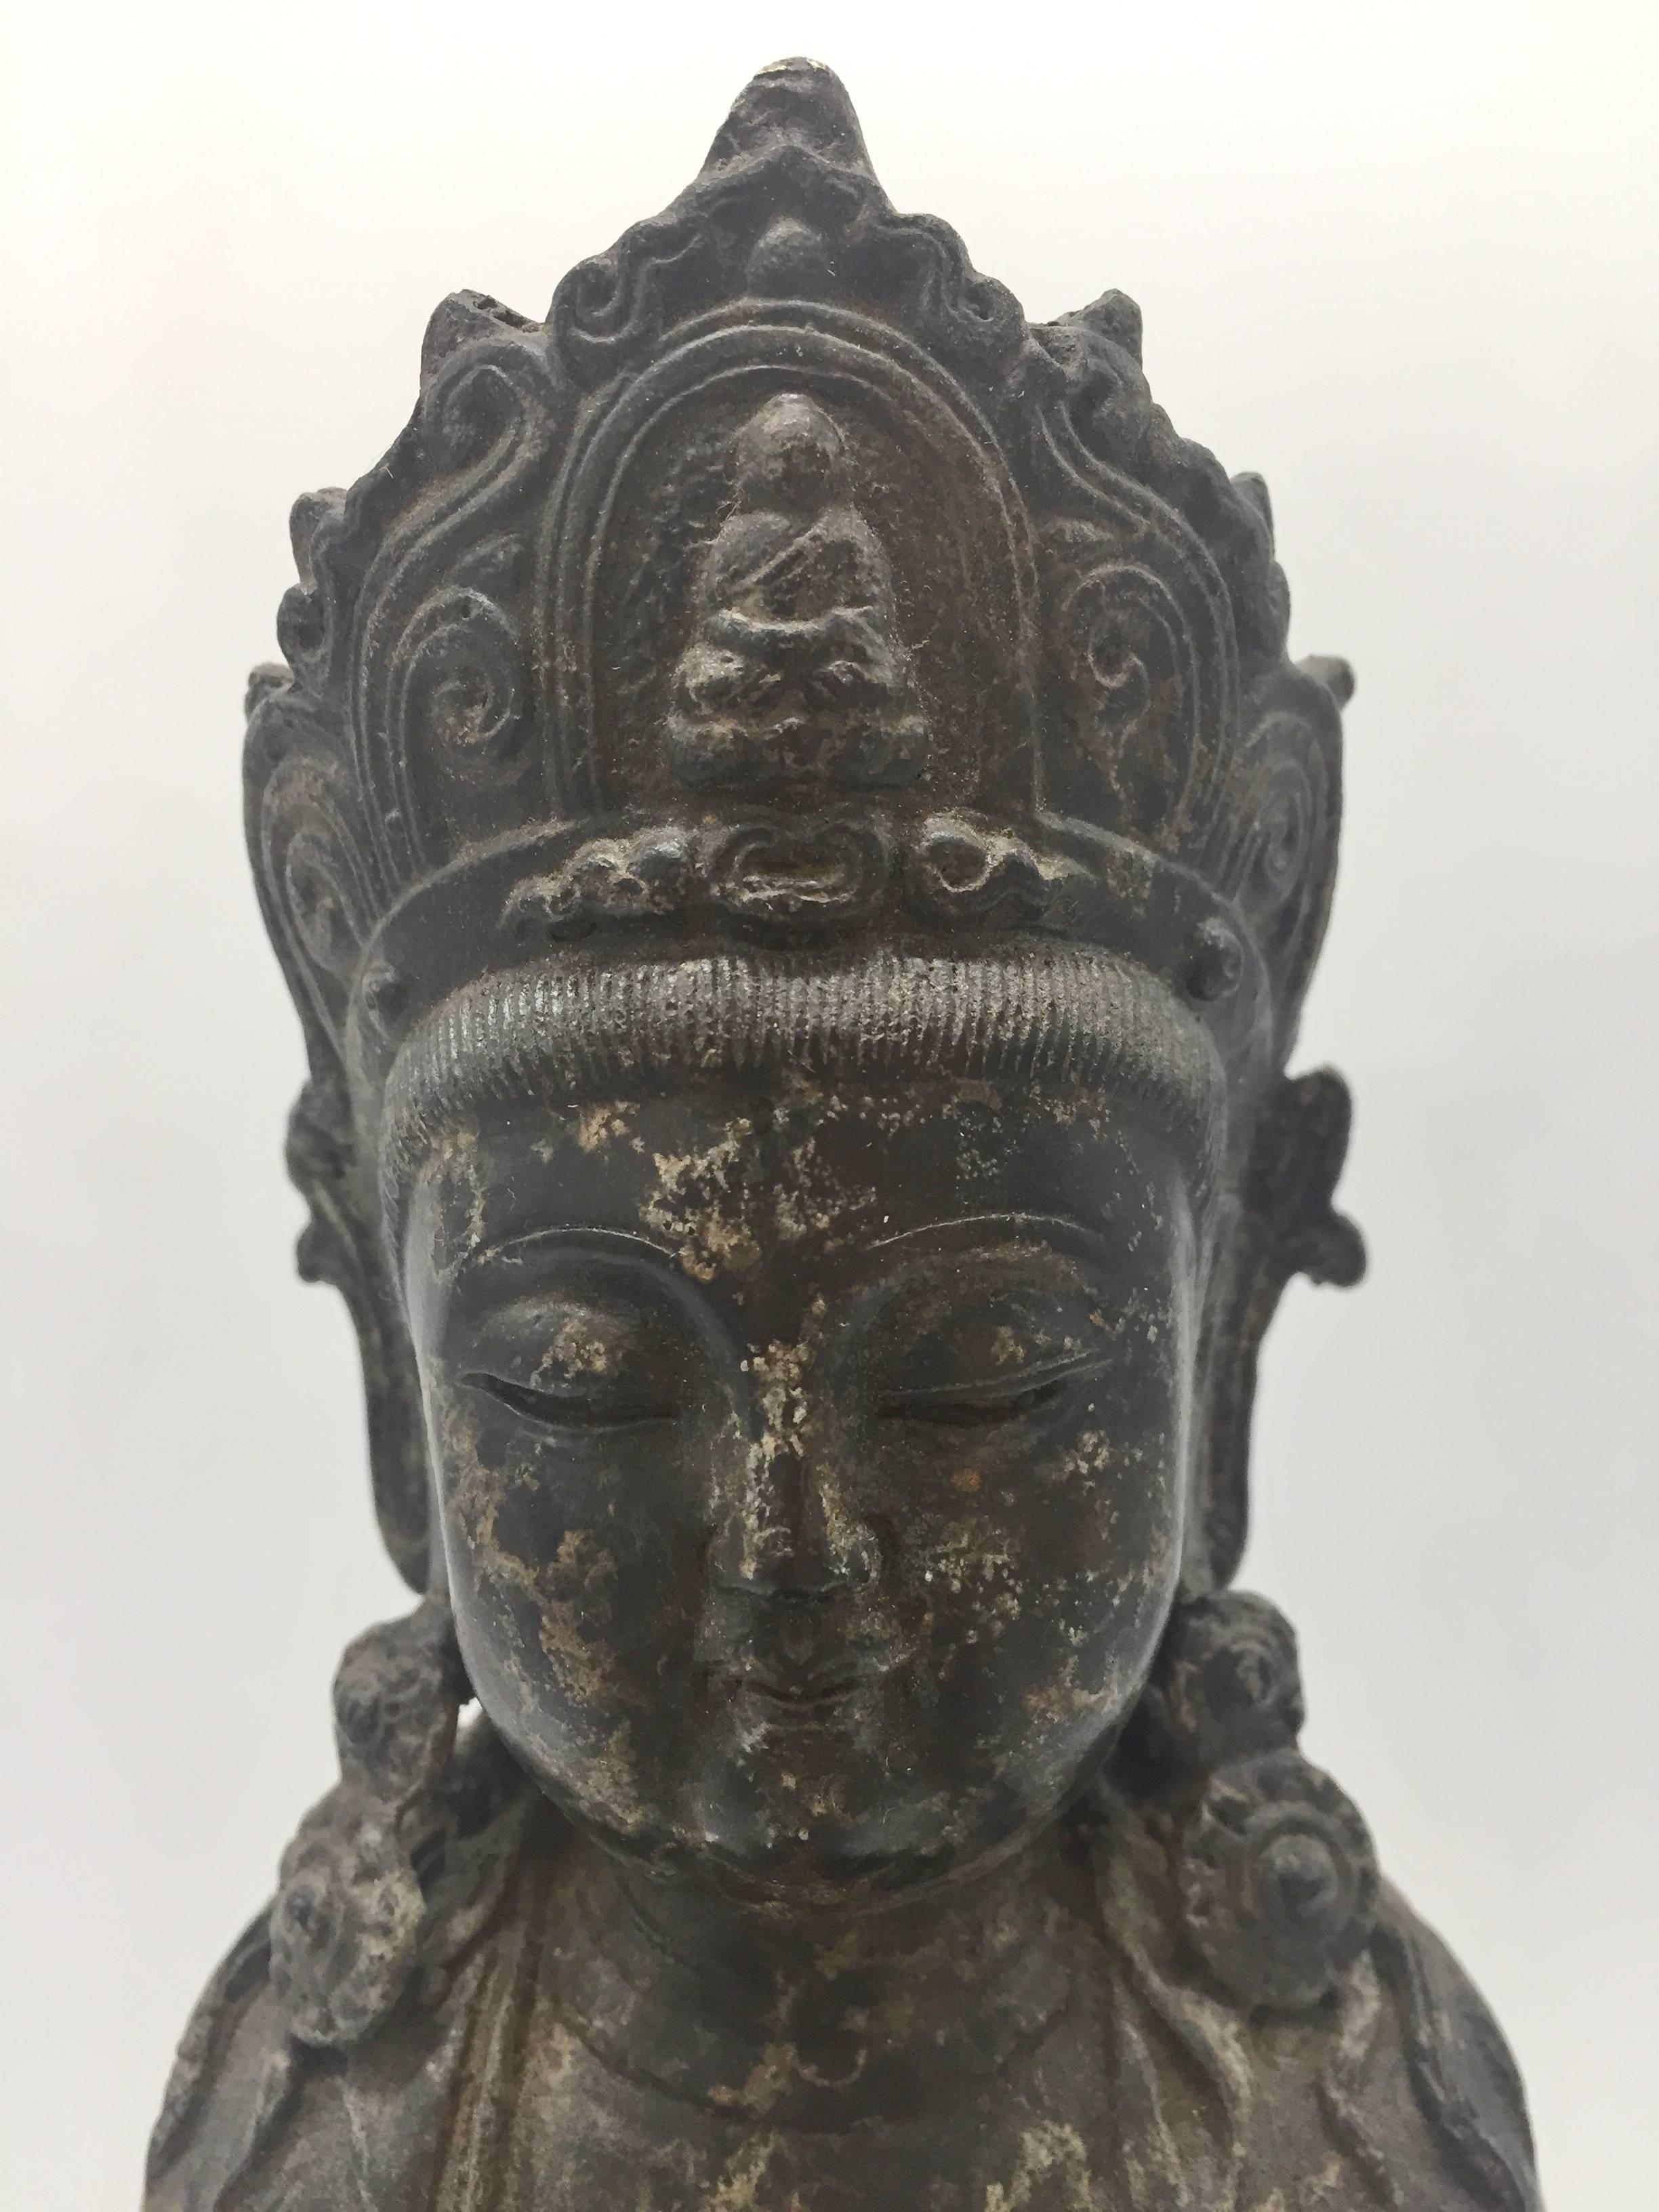 Exquisite 19th century bronze piece features Buddha in the motion of giving blessings. He is seated on the lotus throne, holding a cup of holy water in his hand, ready to bless the people. 

The craftsmanship on this piece is extremely fine. The